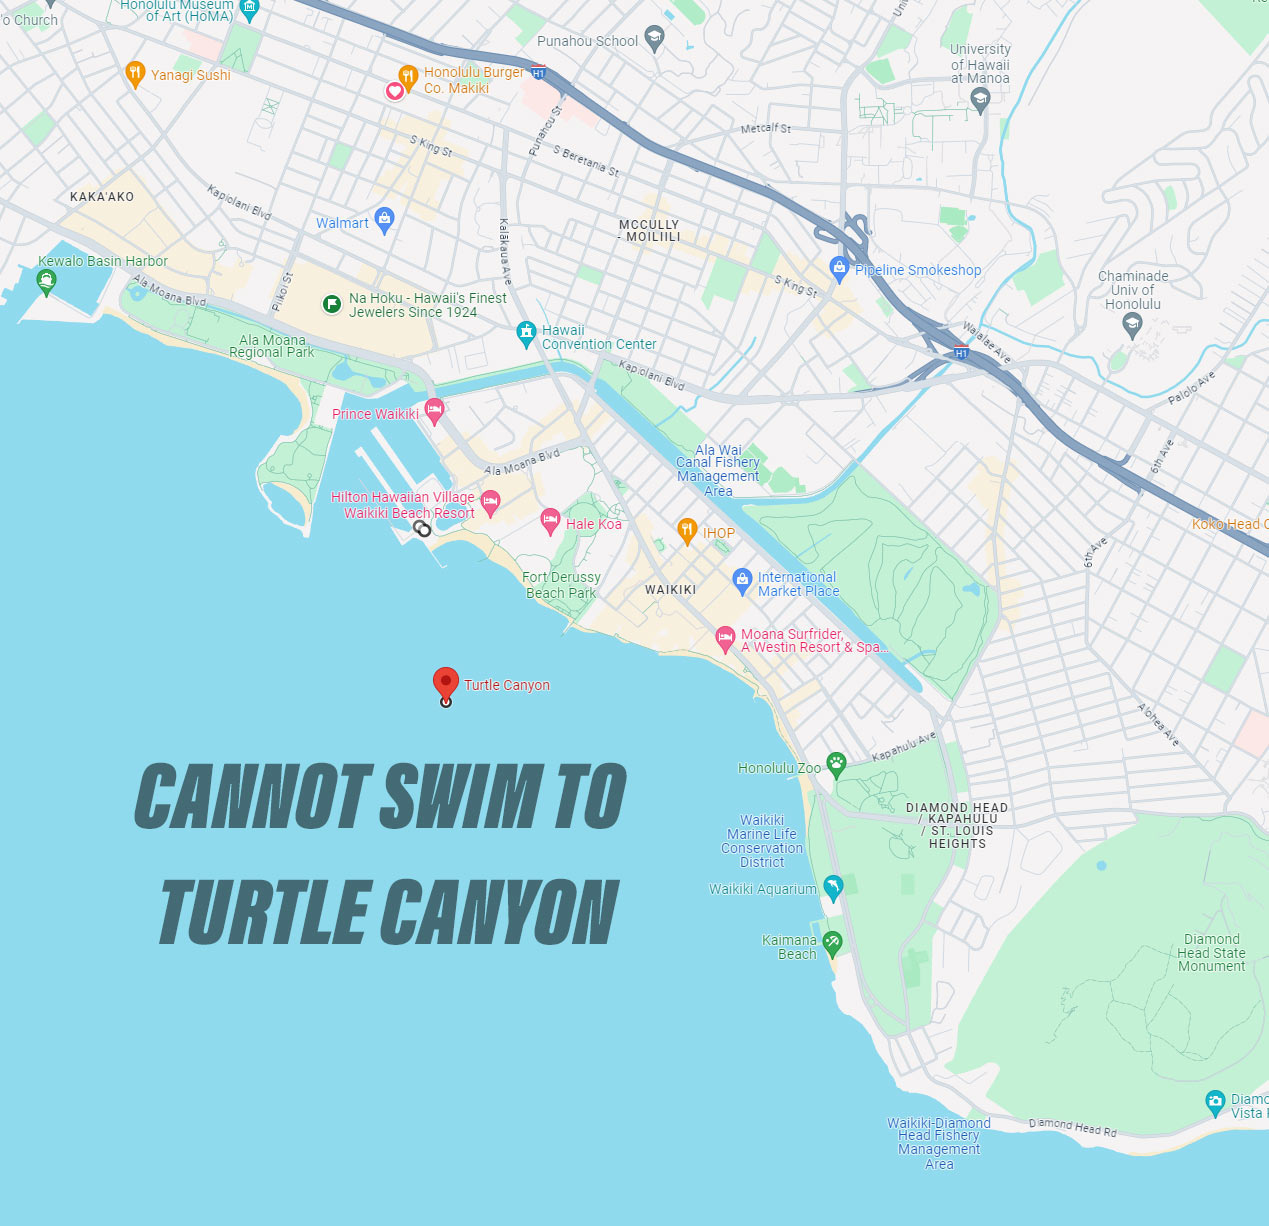 Can you swim to Turtle Canyon from Oahu?